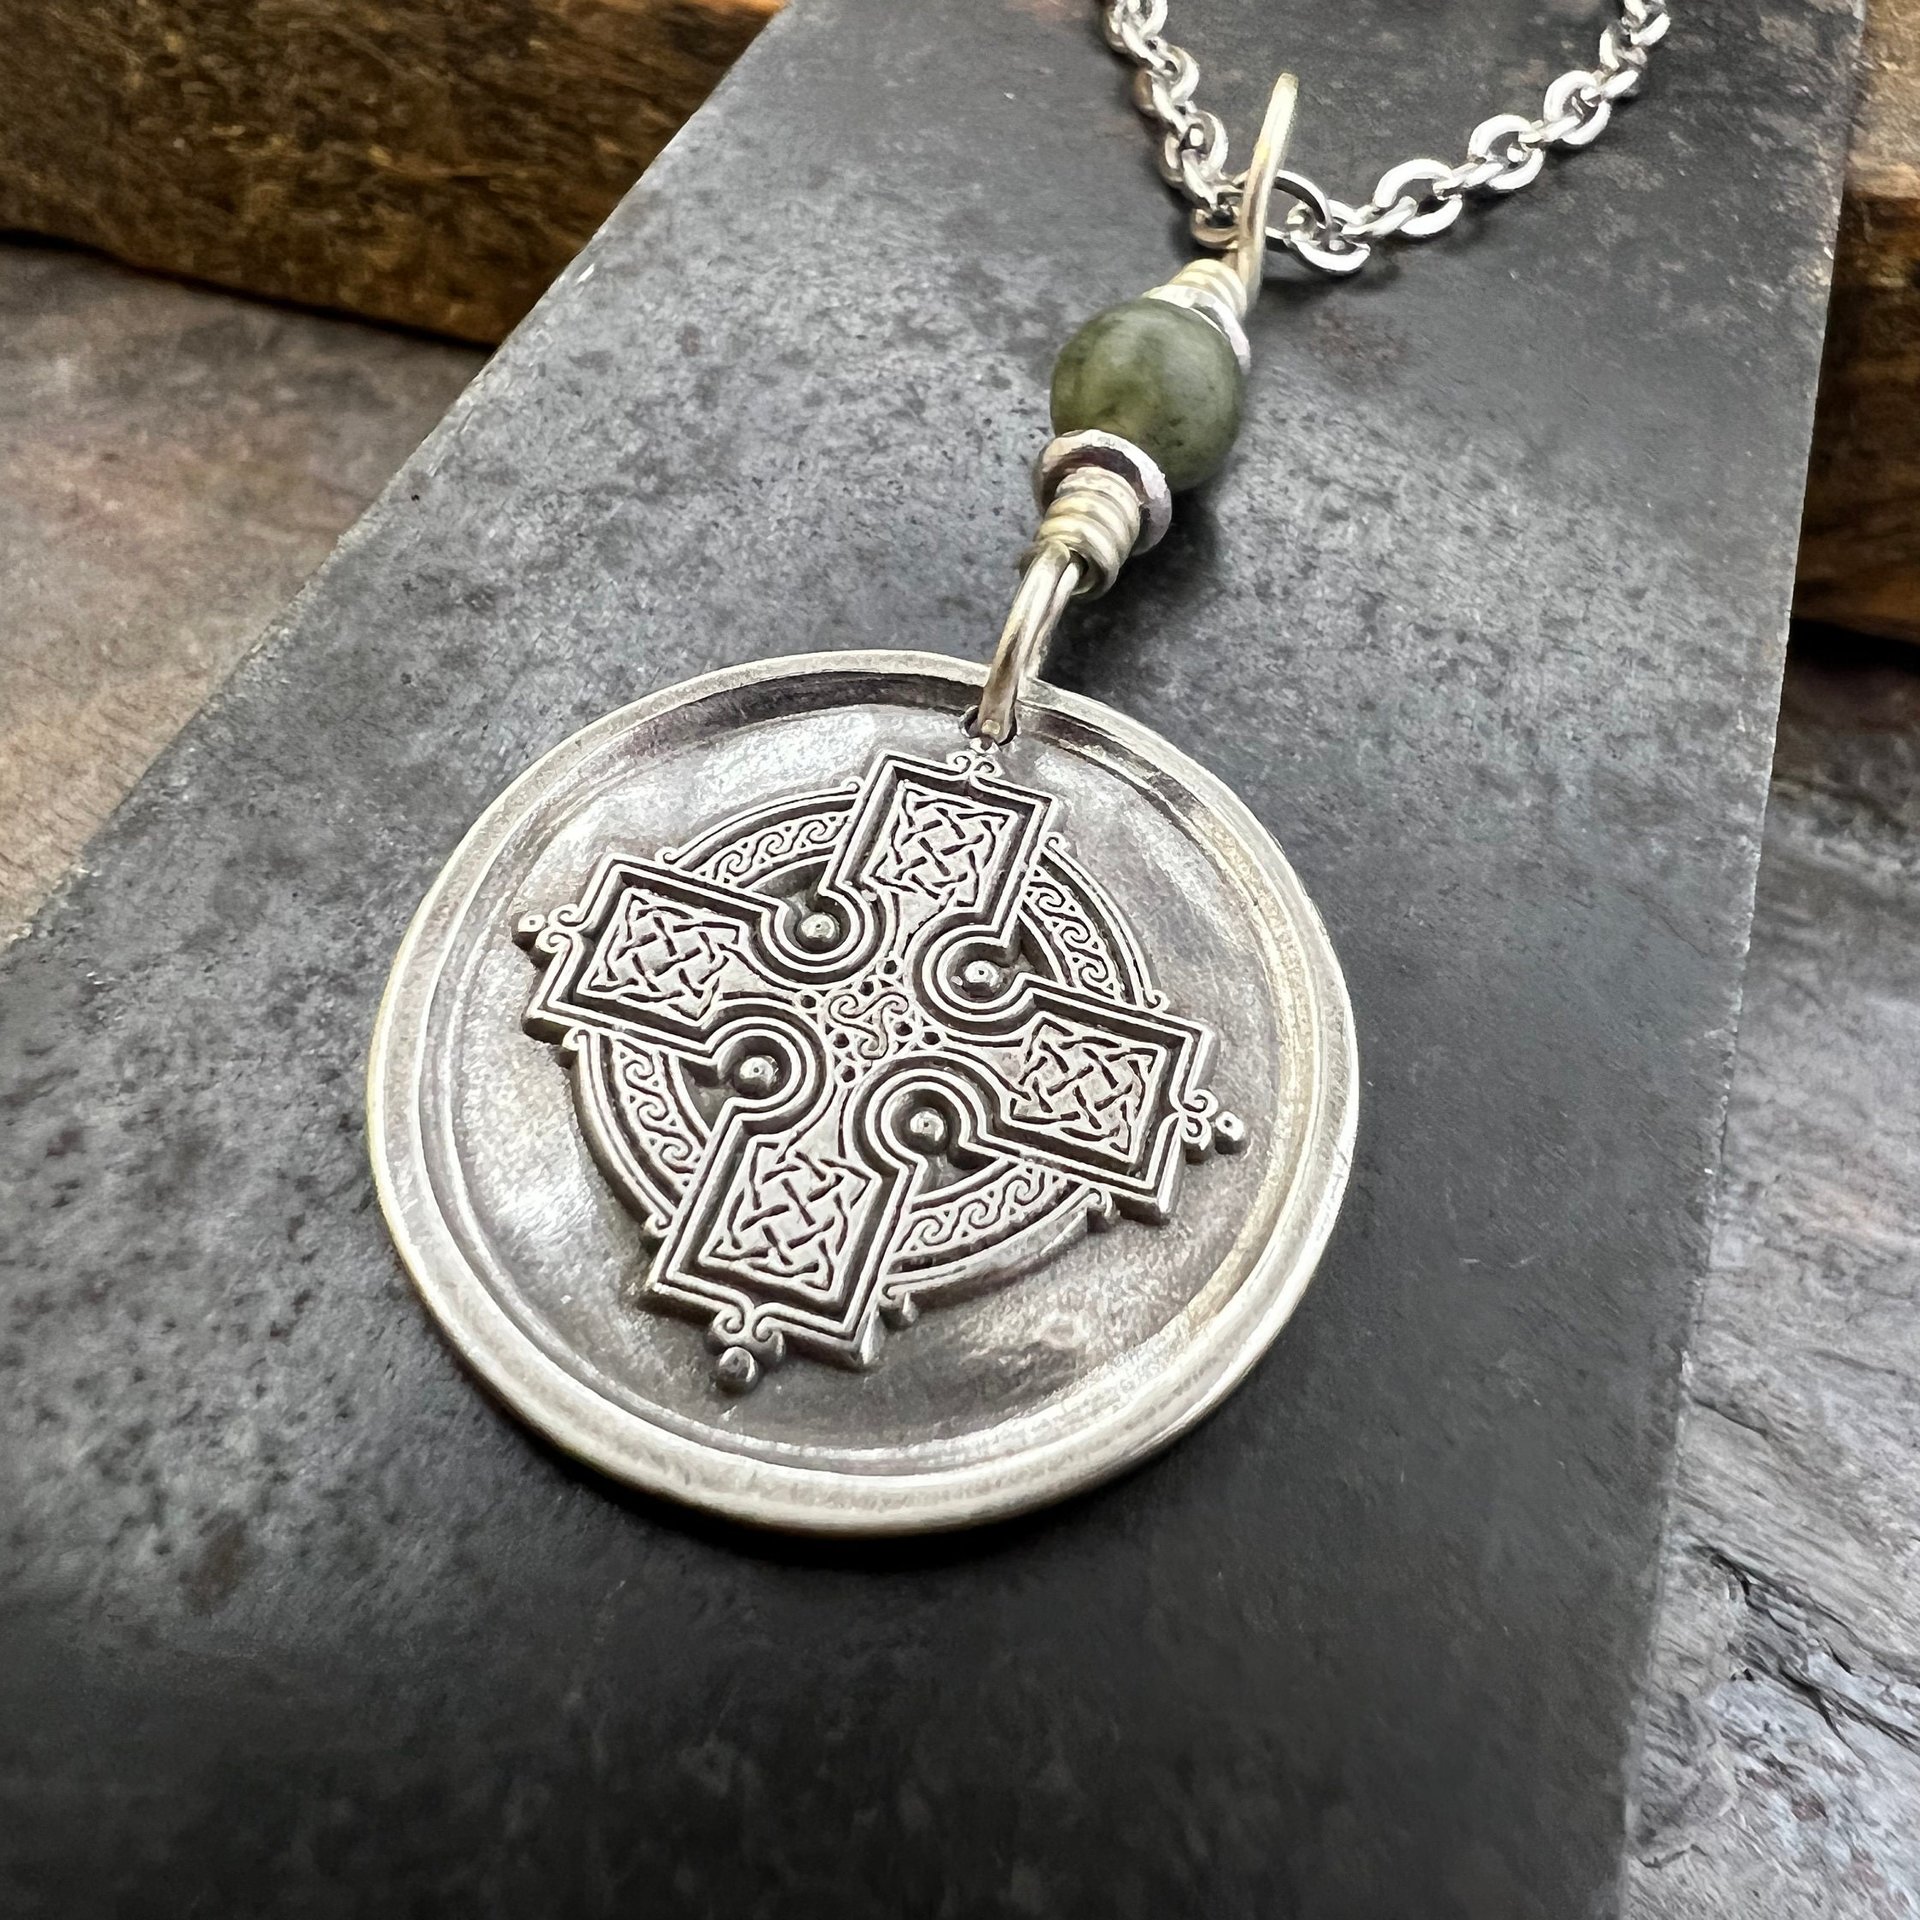 Celtic Cross, Sterling Silver Charm, Connemara Marble, Irish Celtic, Leather & Vegan Cords, Stainless Steel Chain, Silver Cross Necklace